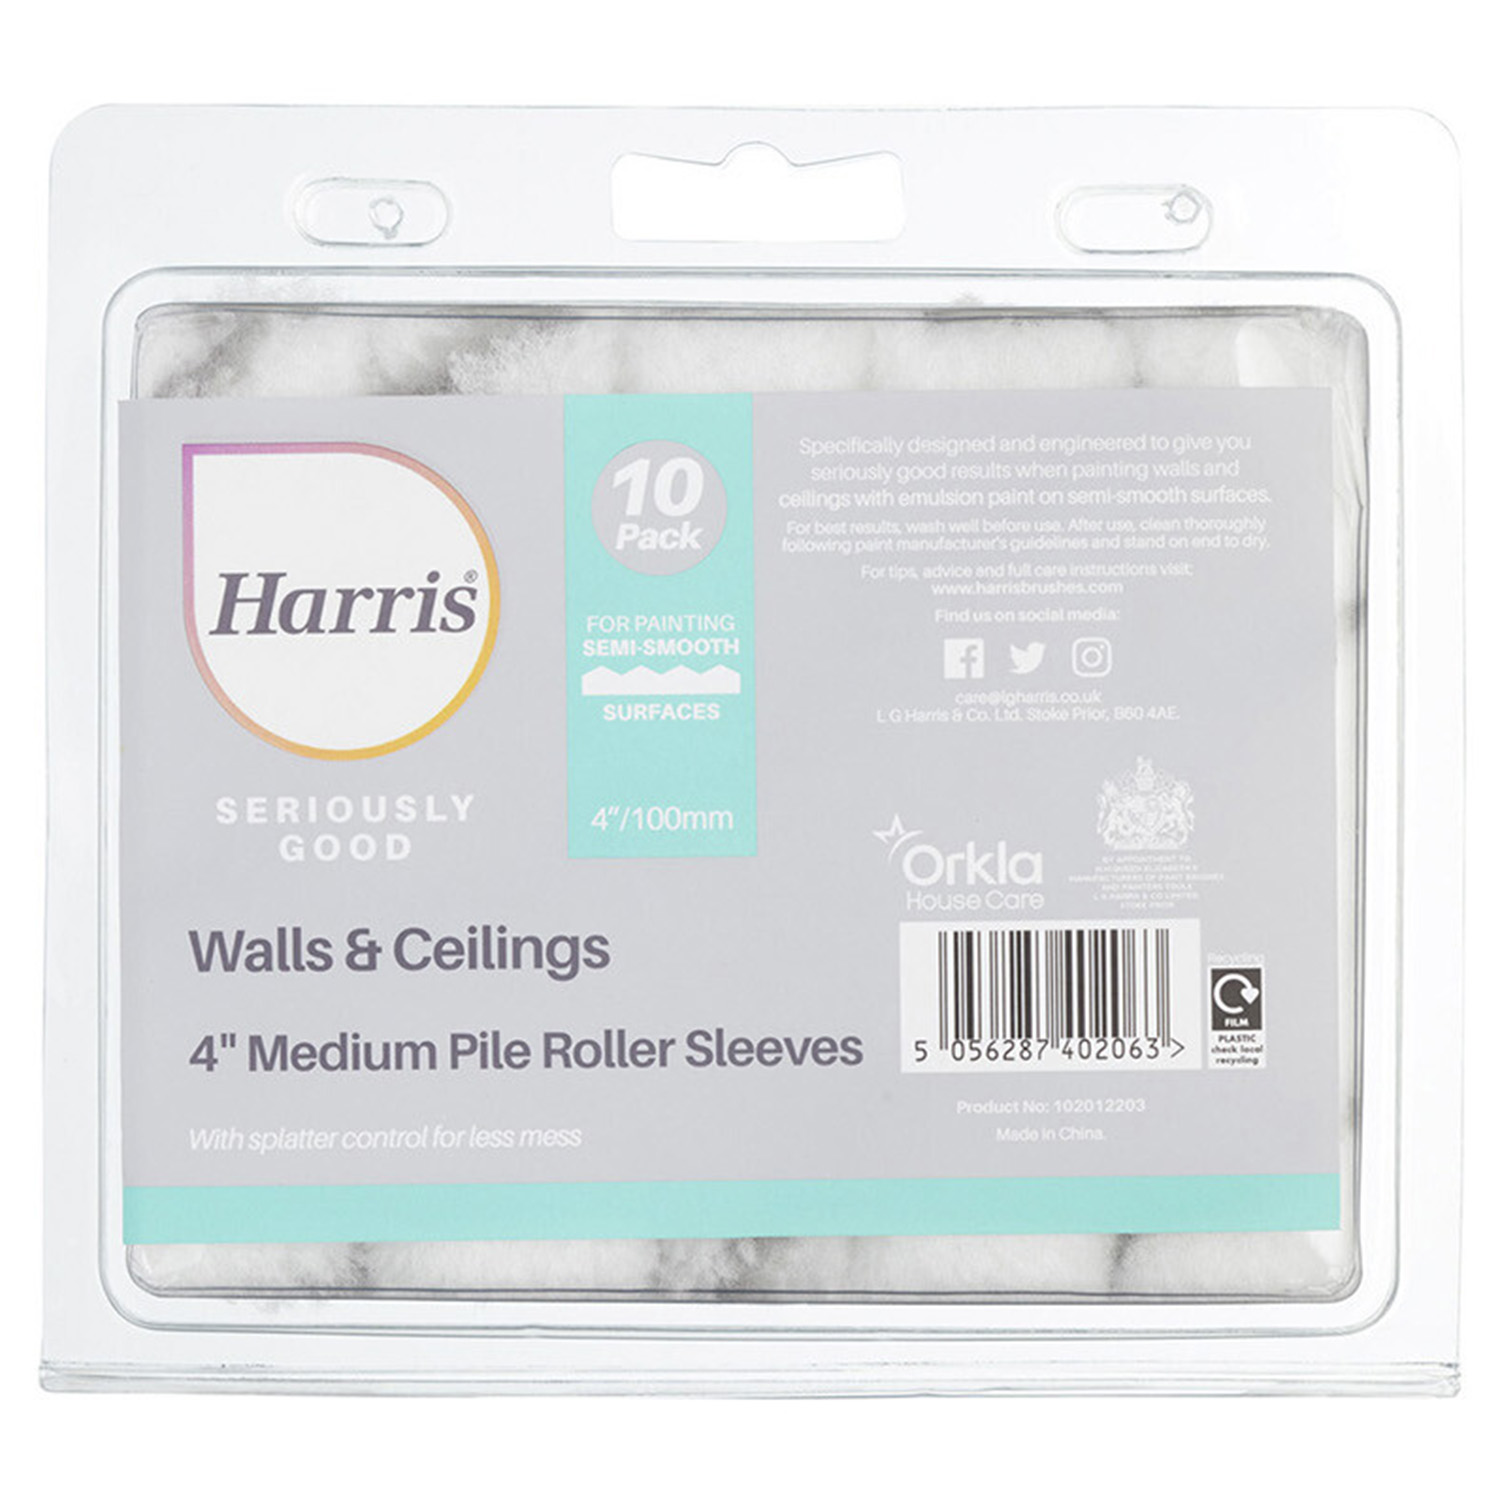 Harris 10 Pack 4 inch Seriously Good Walls and Ceilings Roller Sleeves Image 1